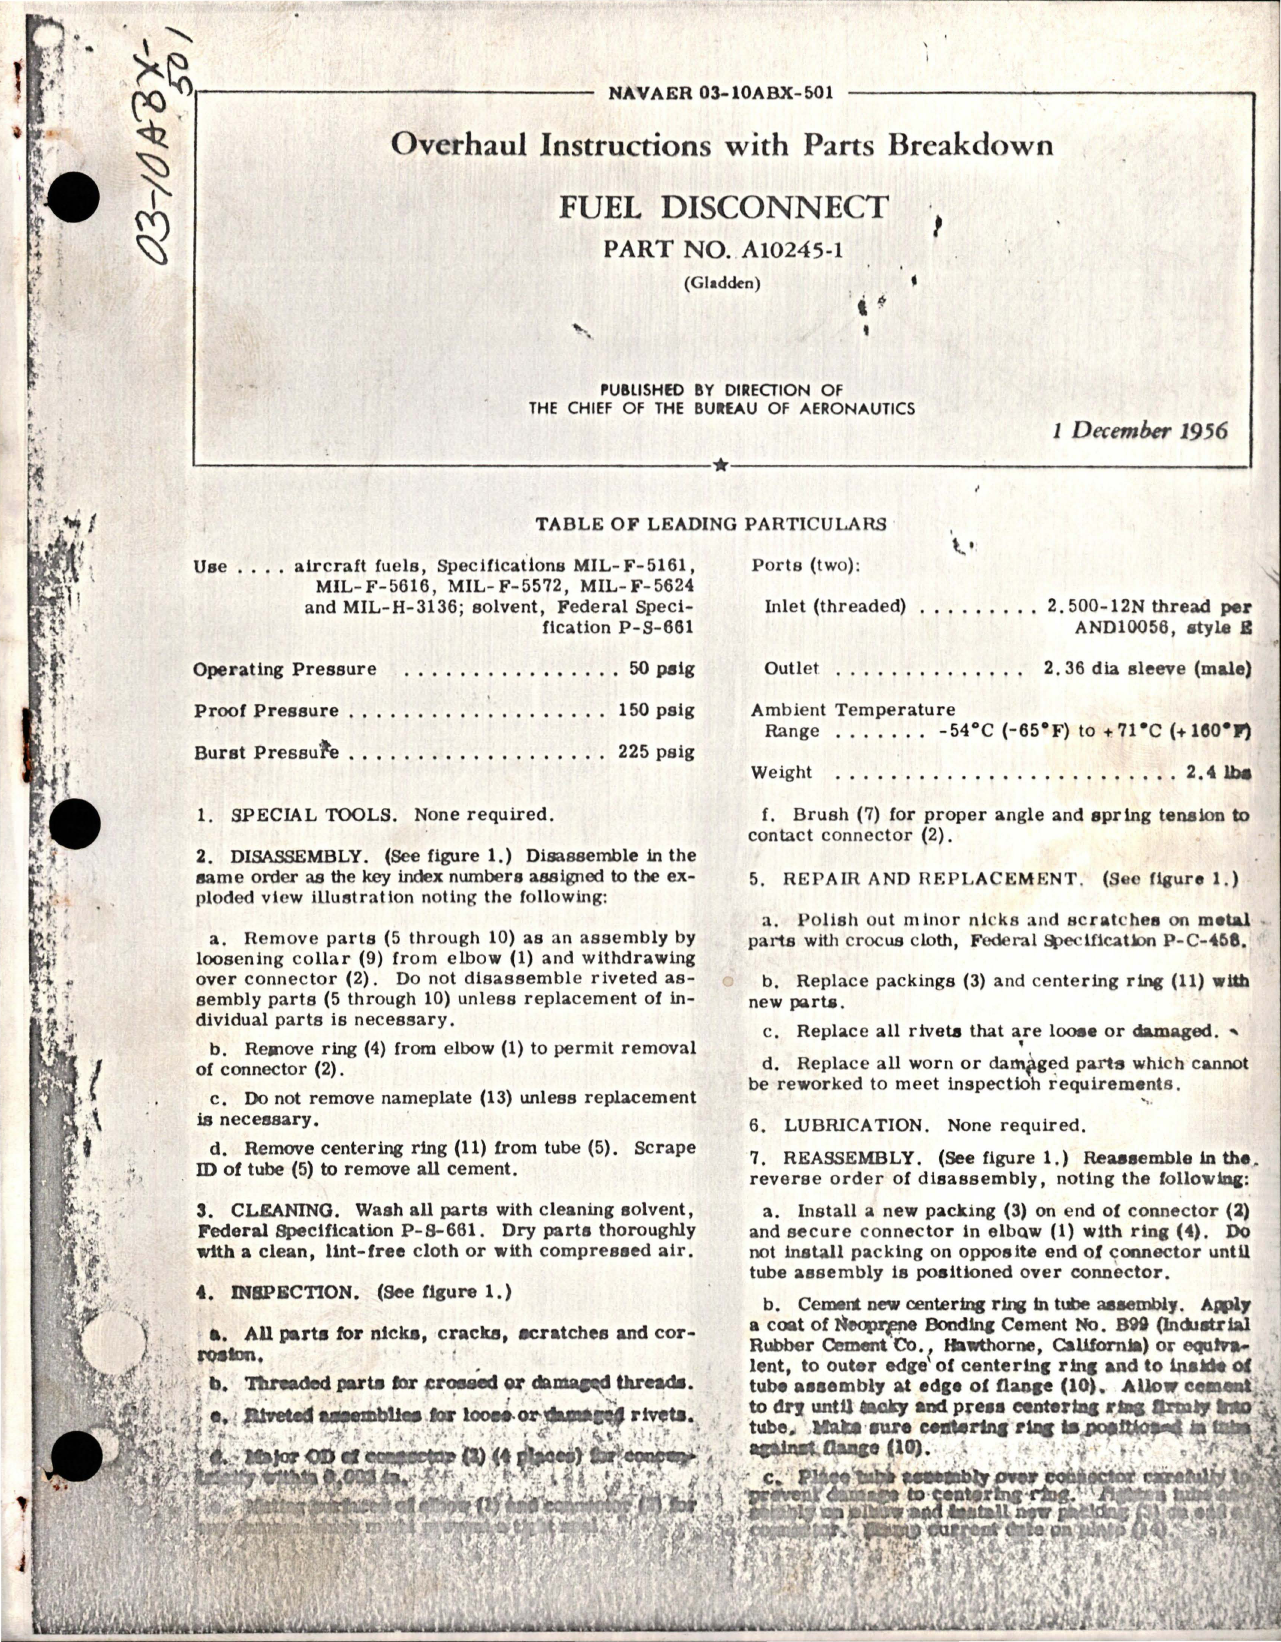 Sample page 1 from AirCorps Library document: Overhaul Instructions with Parts Breakdown for Fuel Disconnect - Part A10245-1